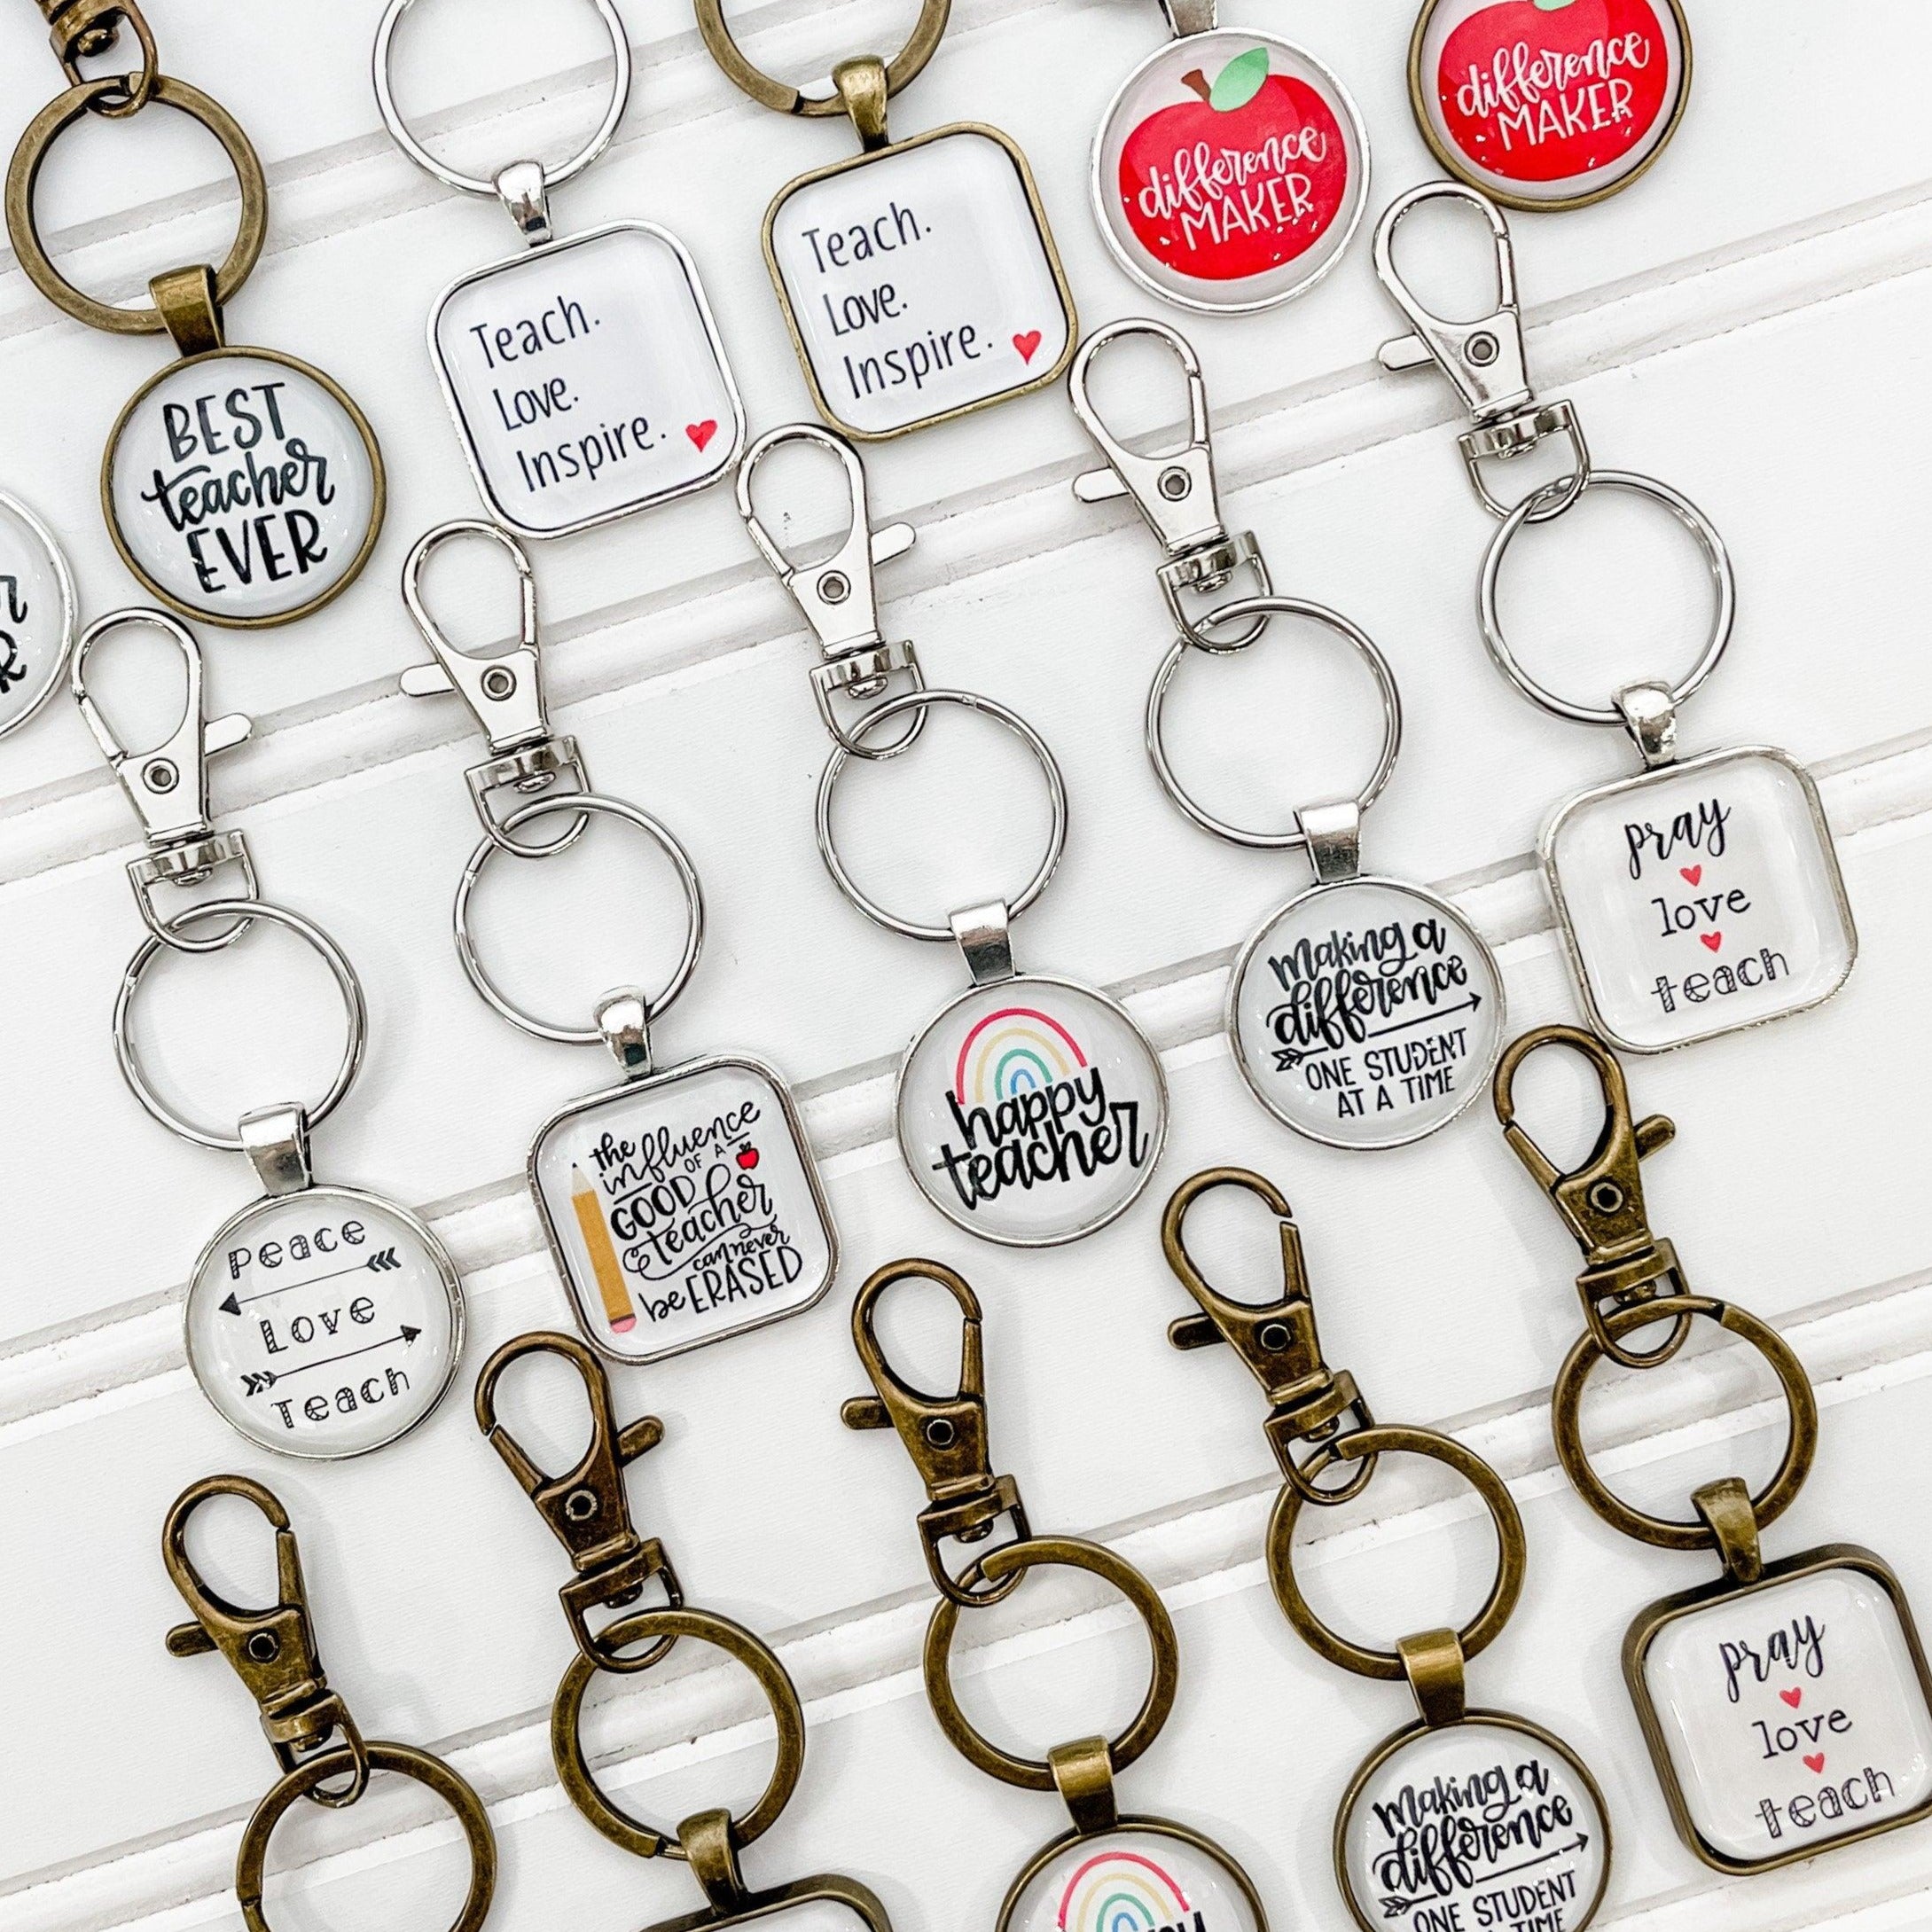 Bulk Teacher Gifts, 10+ Keychains with Group Discount & Free